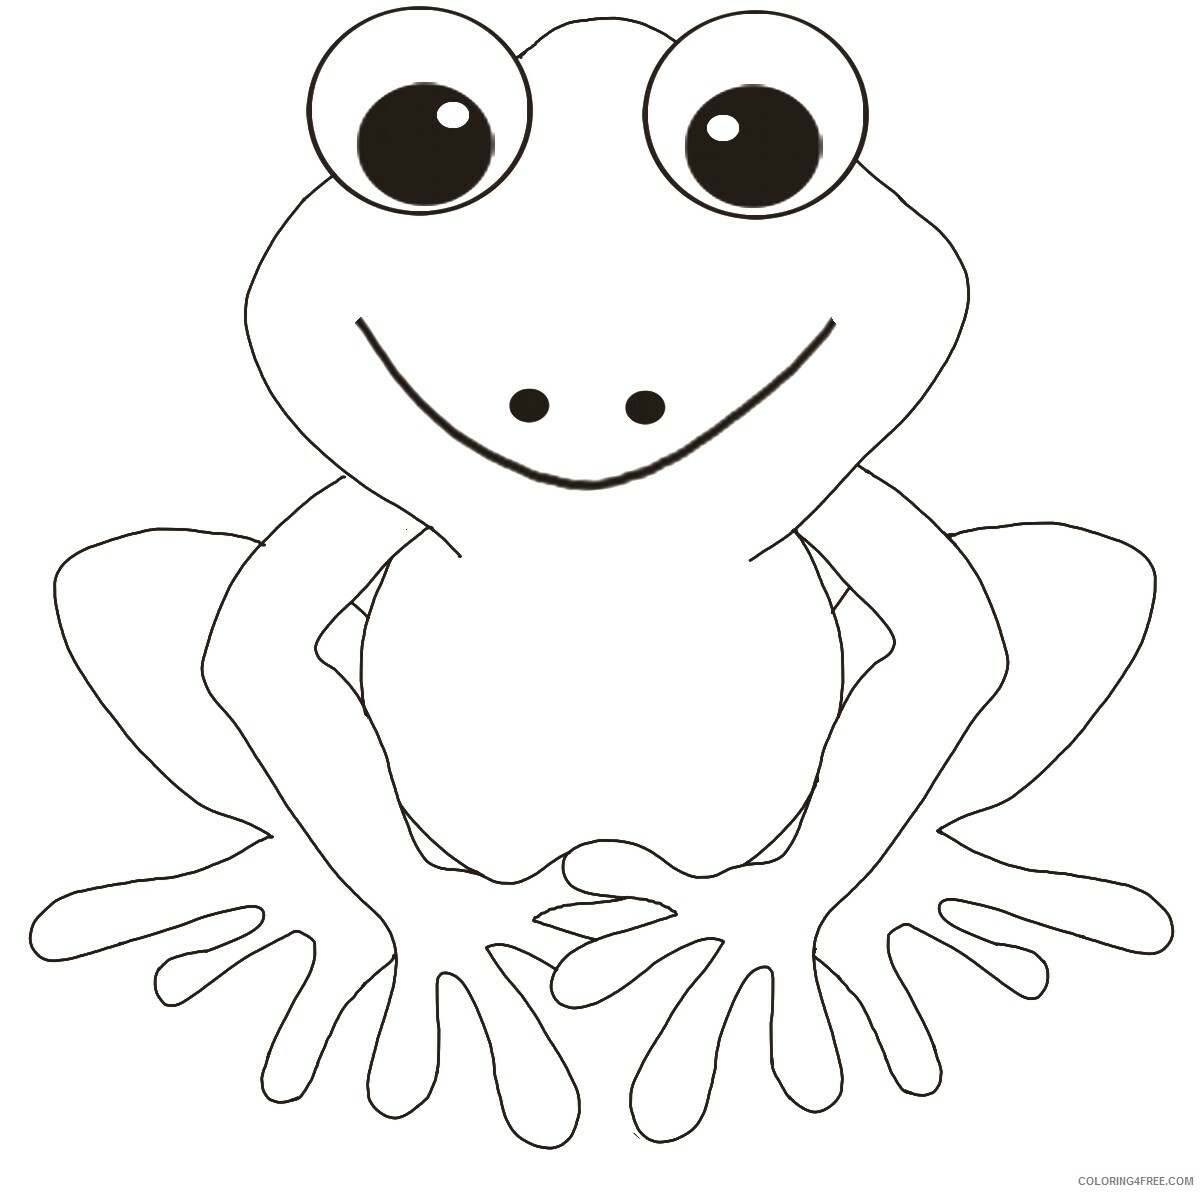 Frog Coloring Pages Animal Printable Sheets Frog 2021 2319 Coloring4free